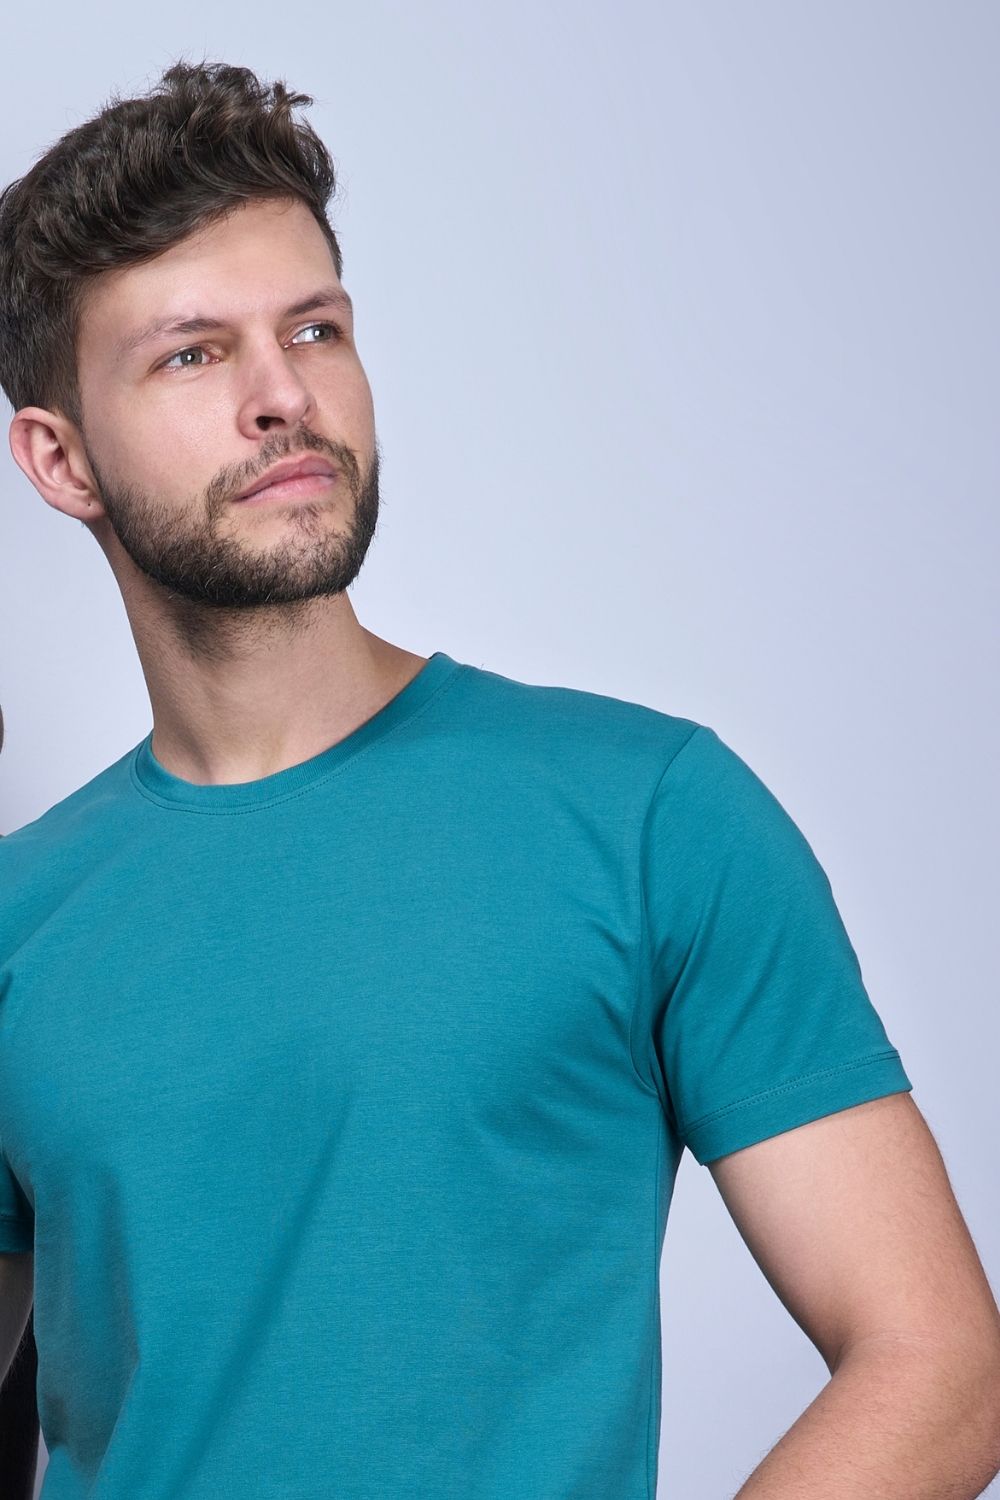 Cotton Stretch T shirt for men in the the solid color British Green with half sleeves and round neck, sleeves closeup.